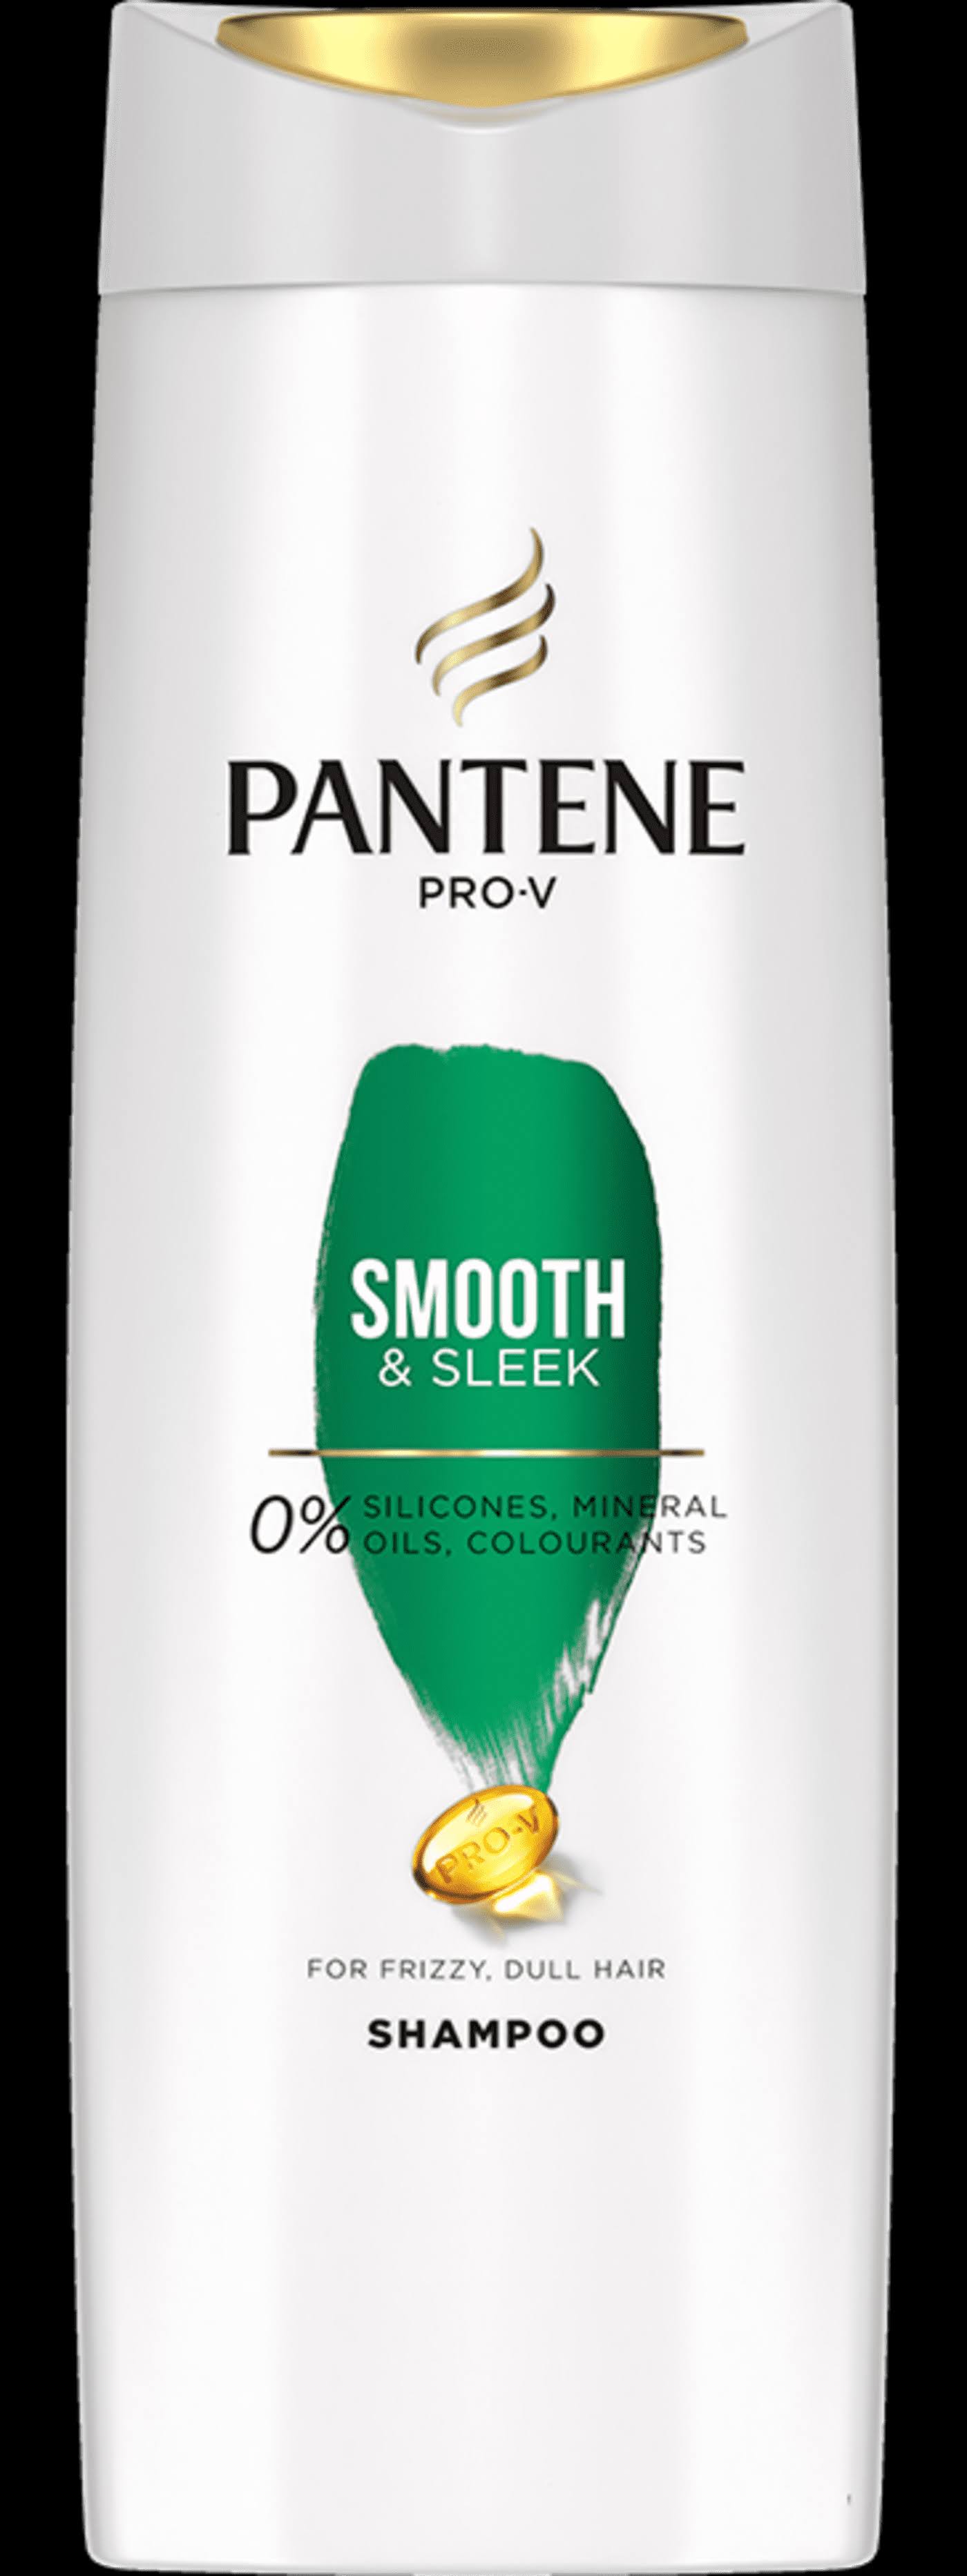 Pantene Pro-V Smooth and Sleek Shampoo - For Dull and Frizzy Hair, 270ml